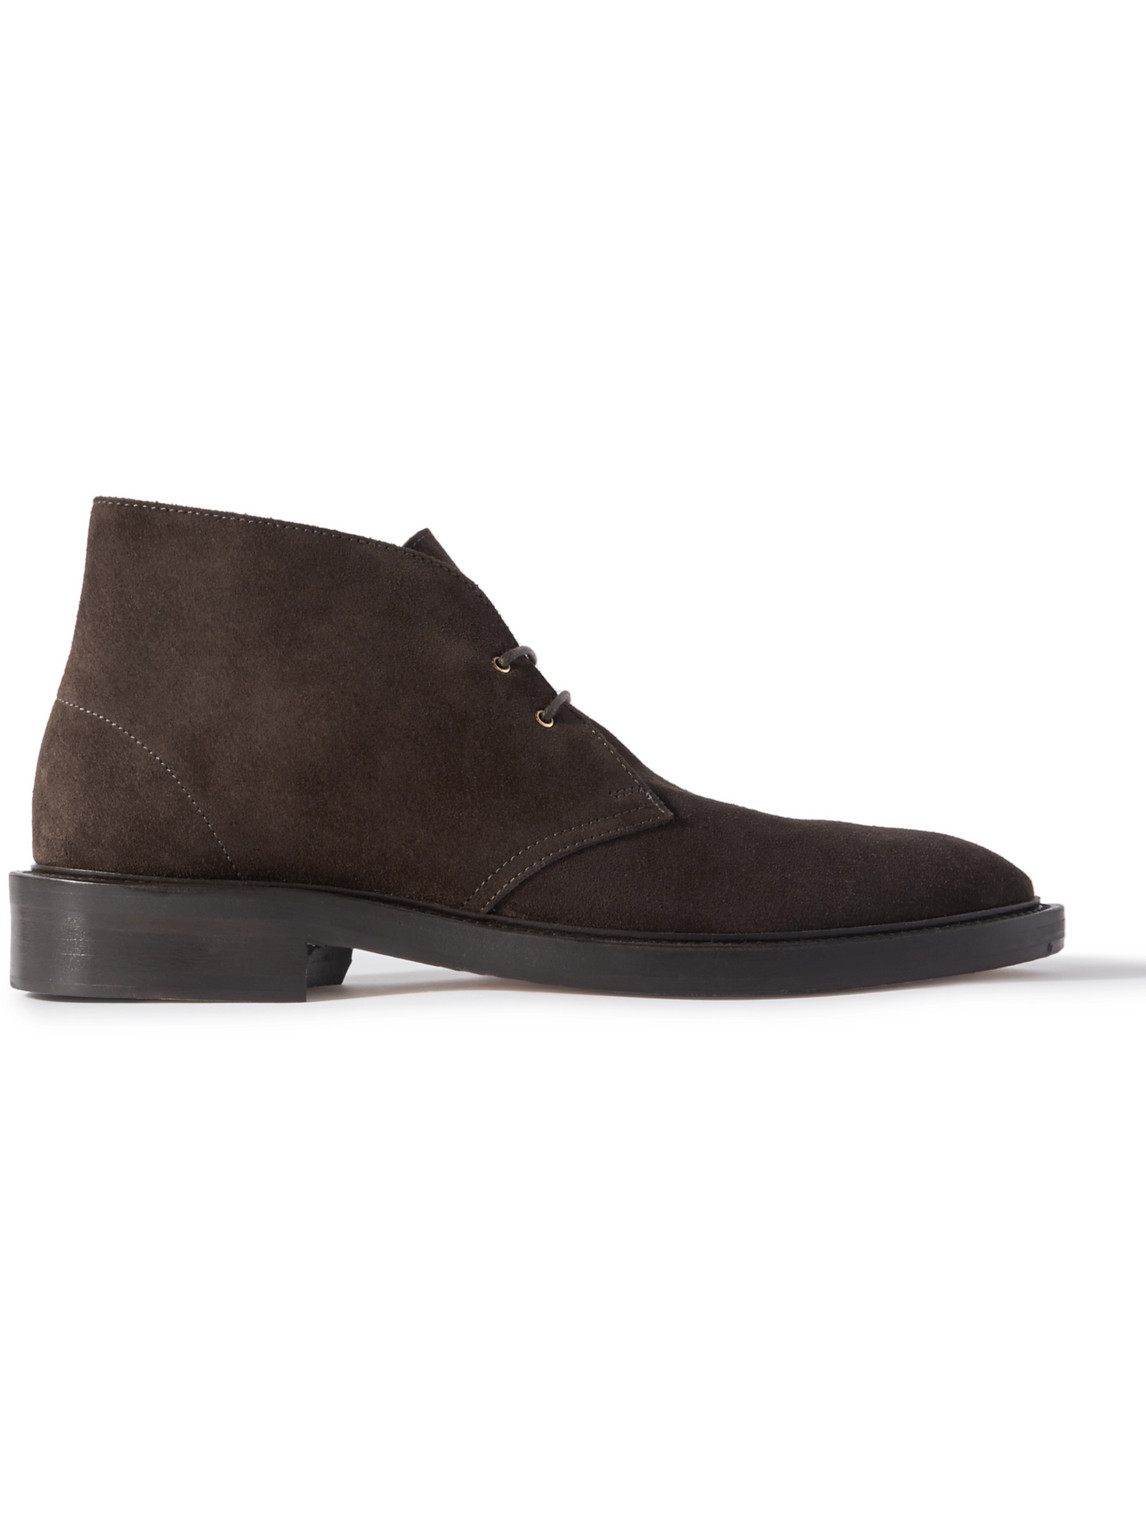 Paul Smith Suede Lace-up Boots In Brown